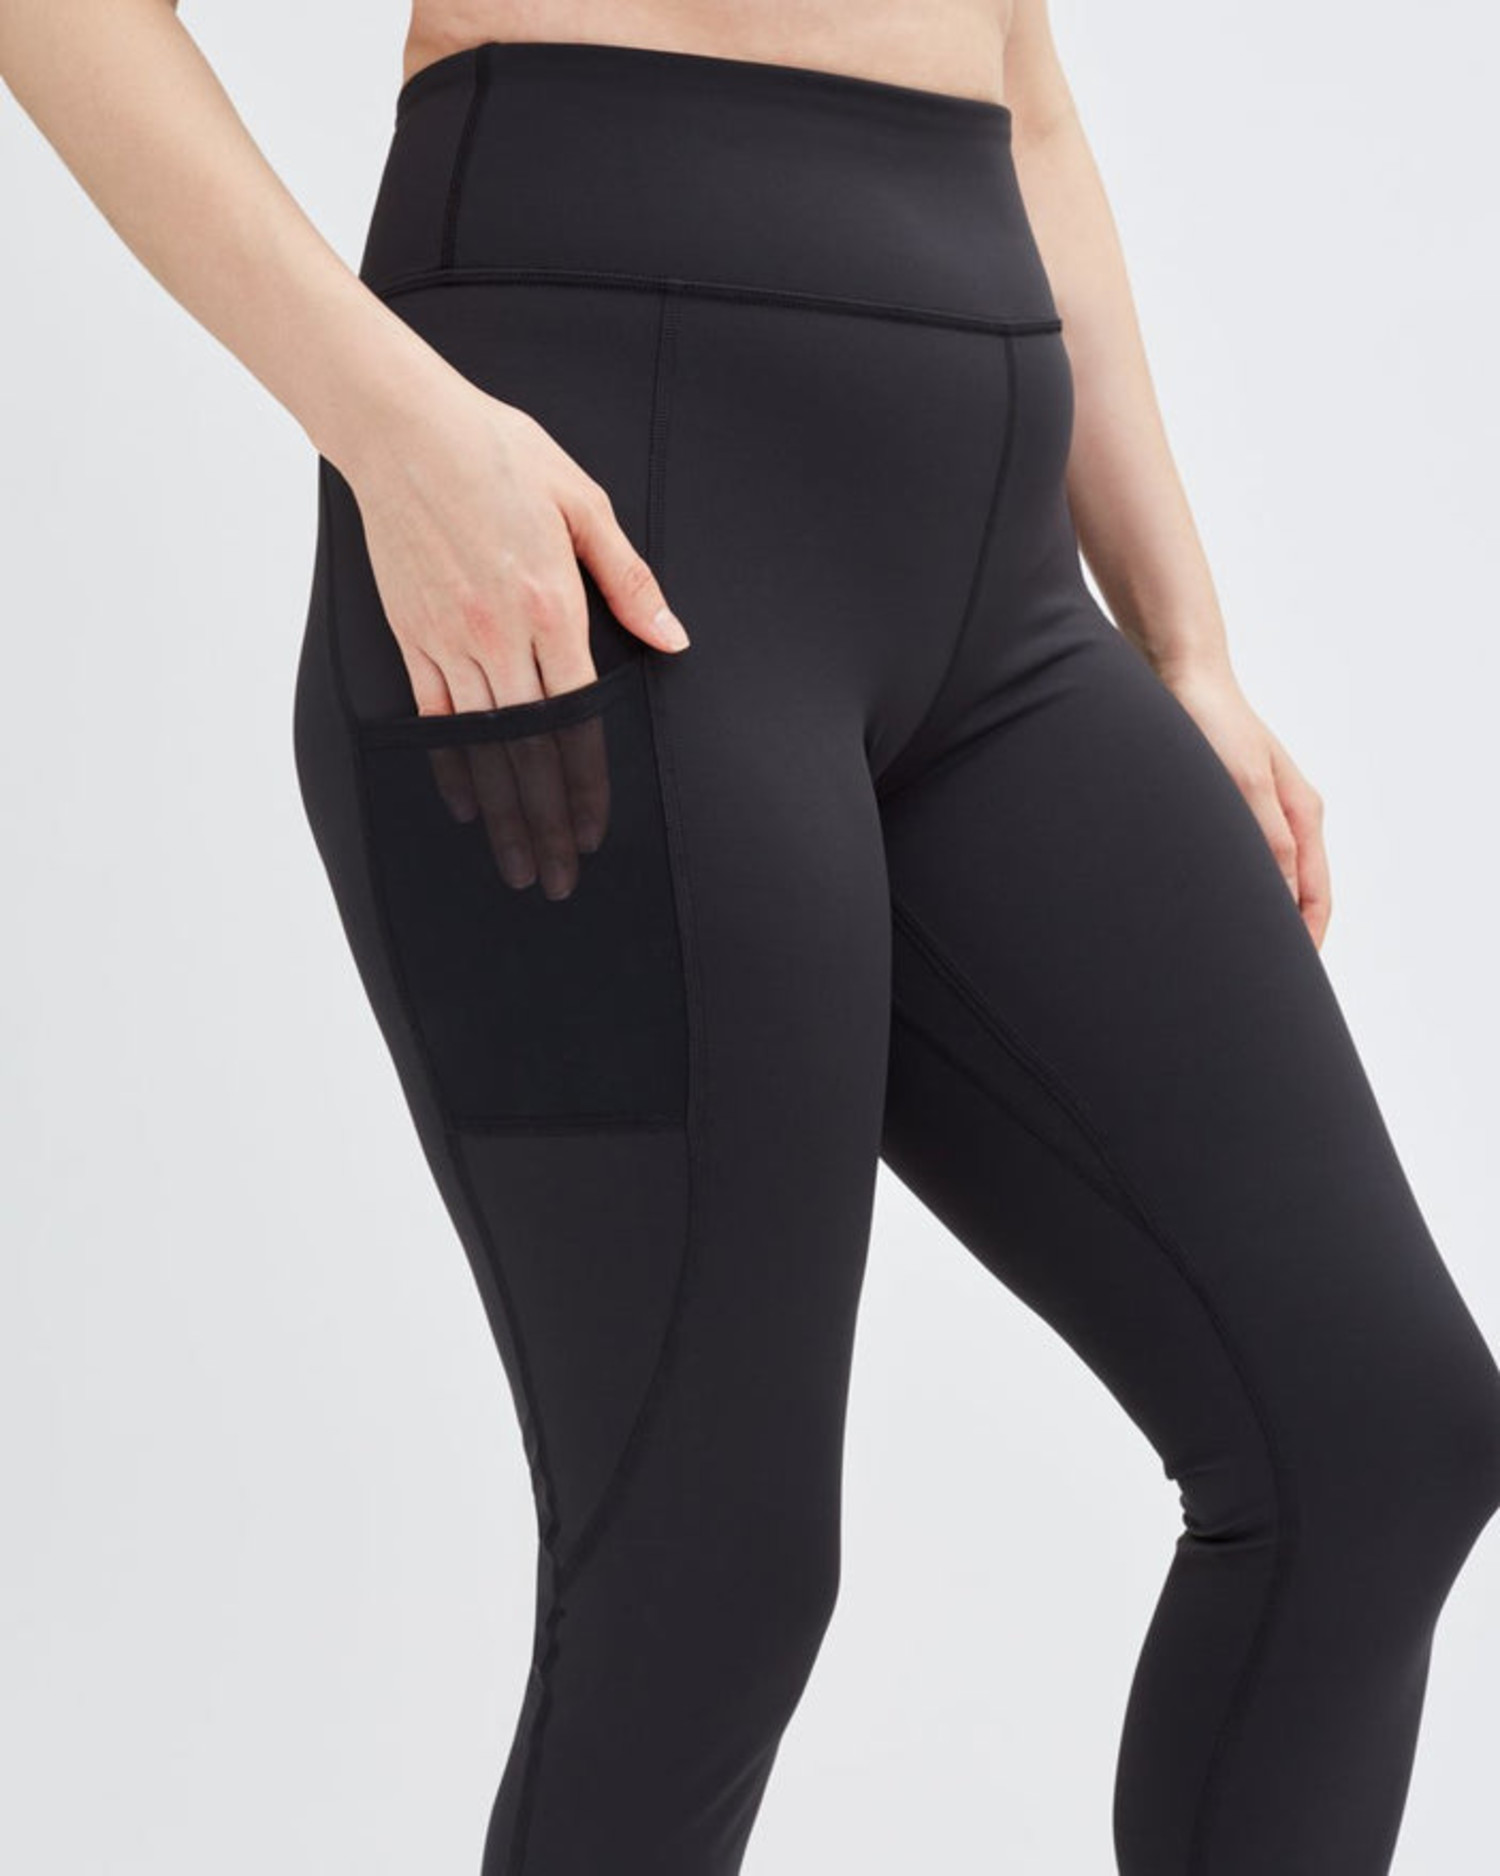 Fabletics Shop Holiday Deals on Womens Pants